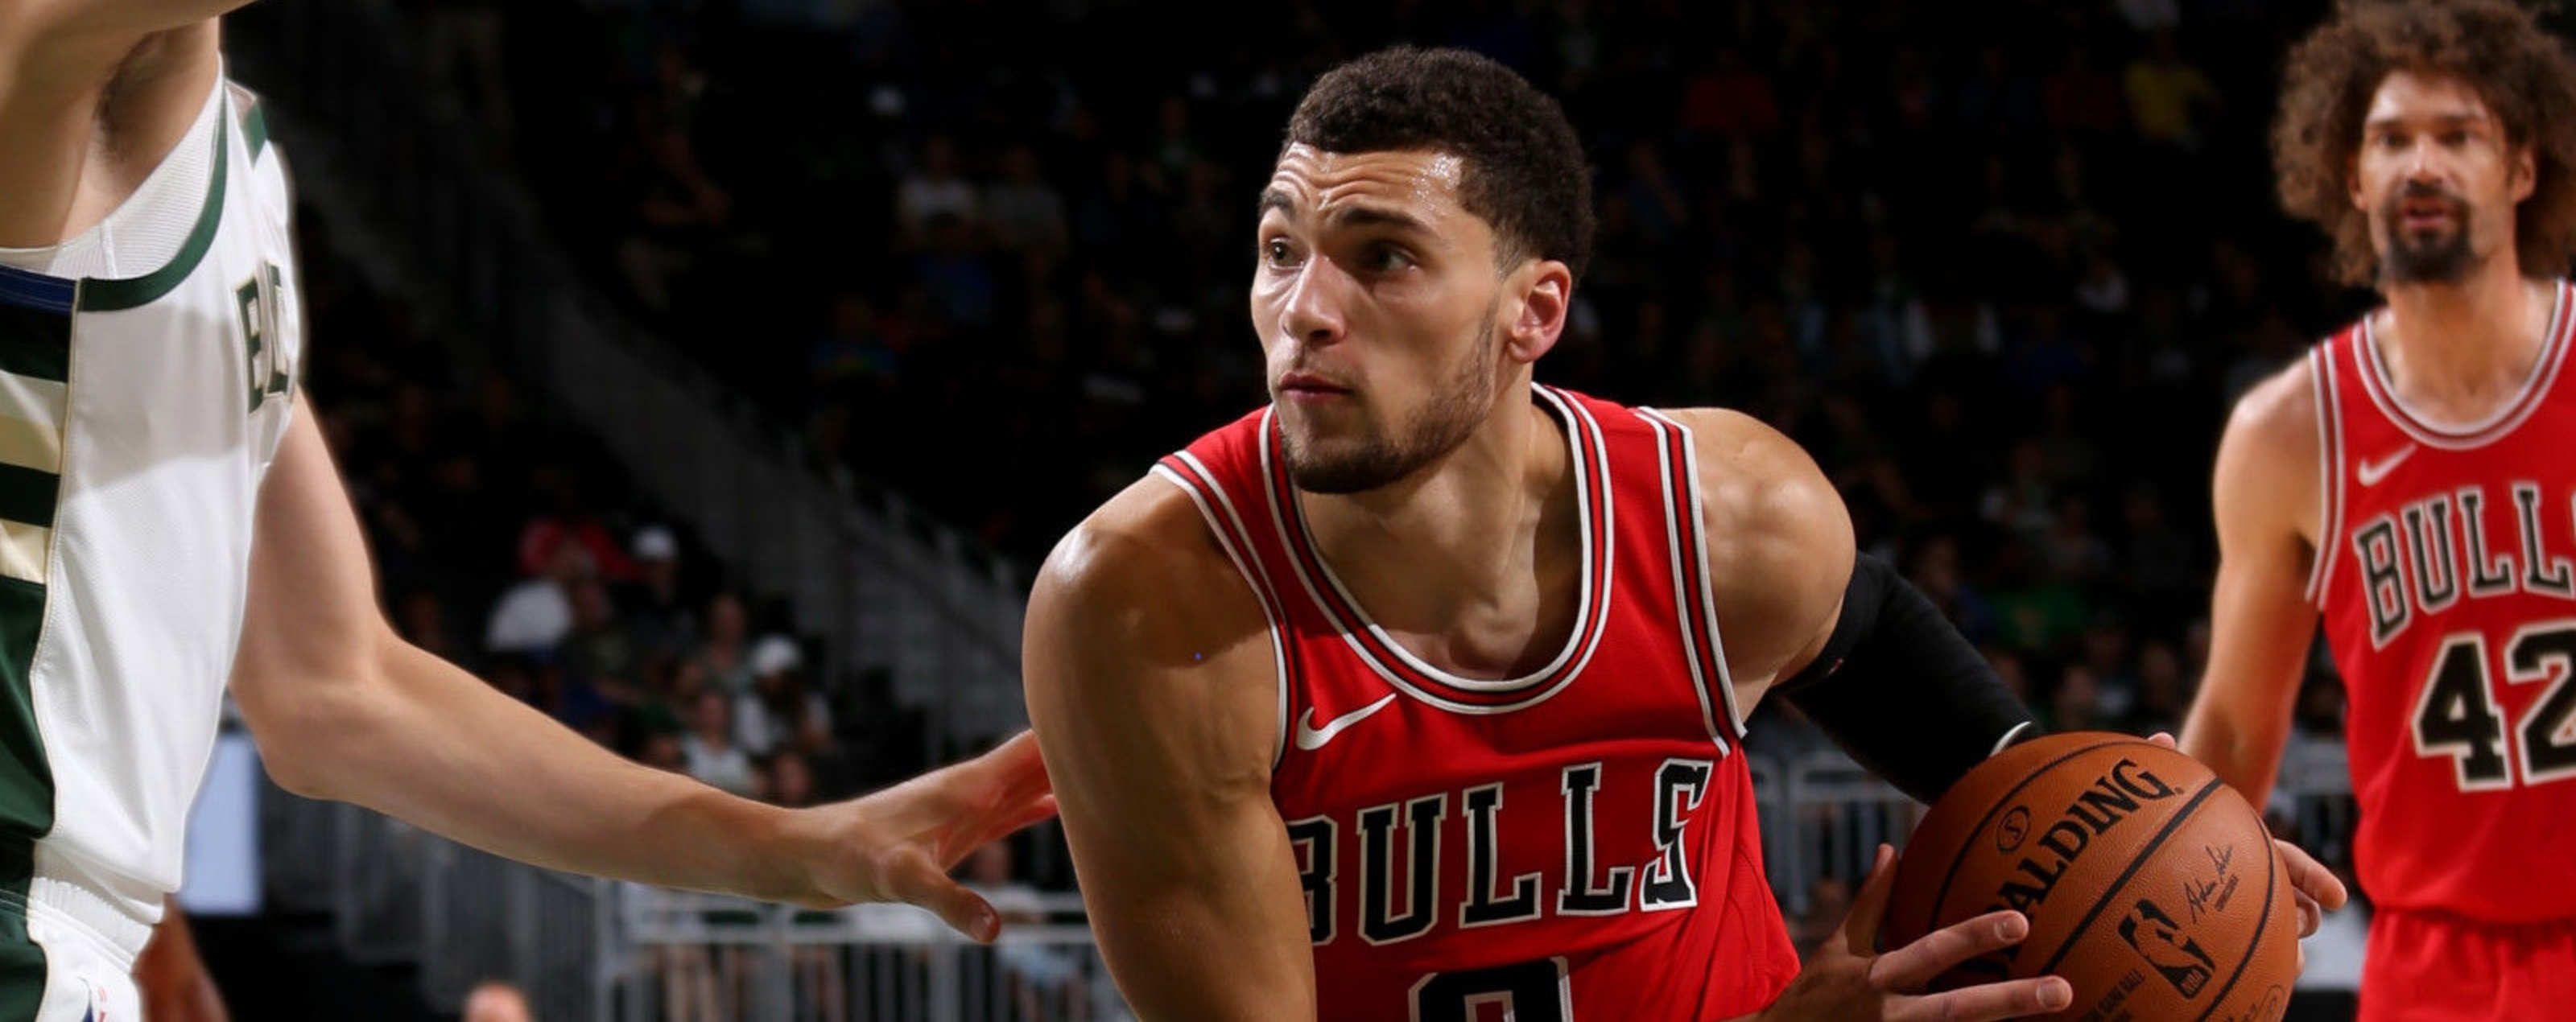 With Markkanen still out, LaVine is ready to step up